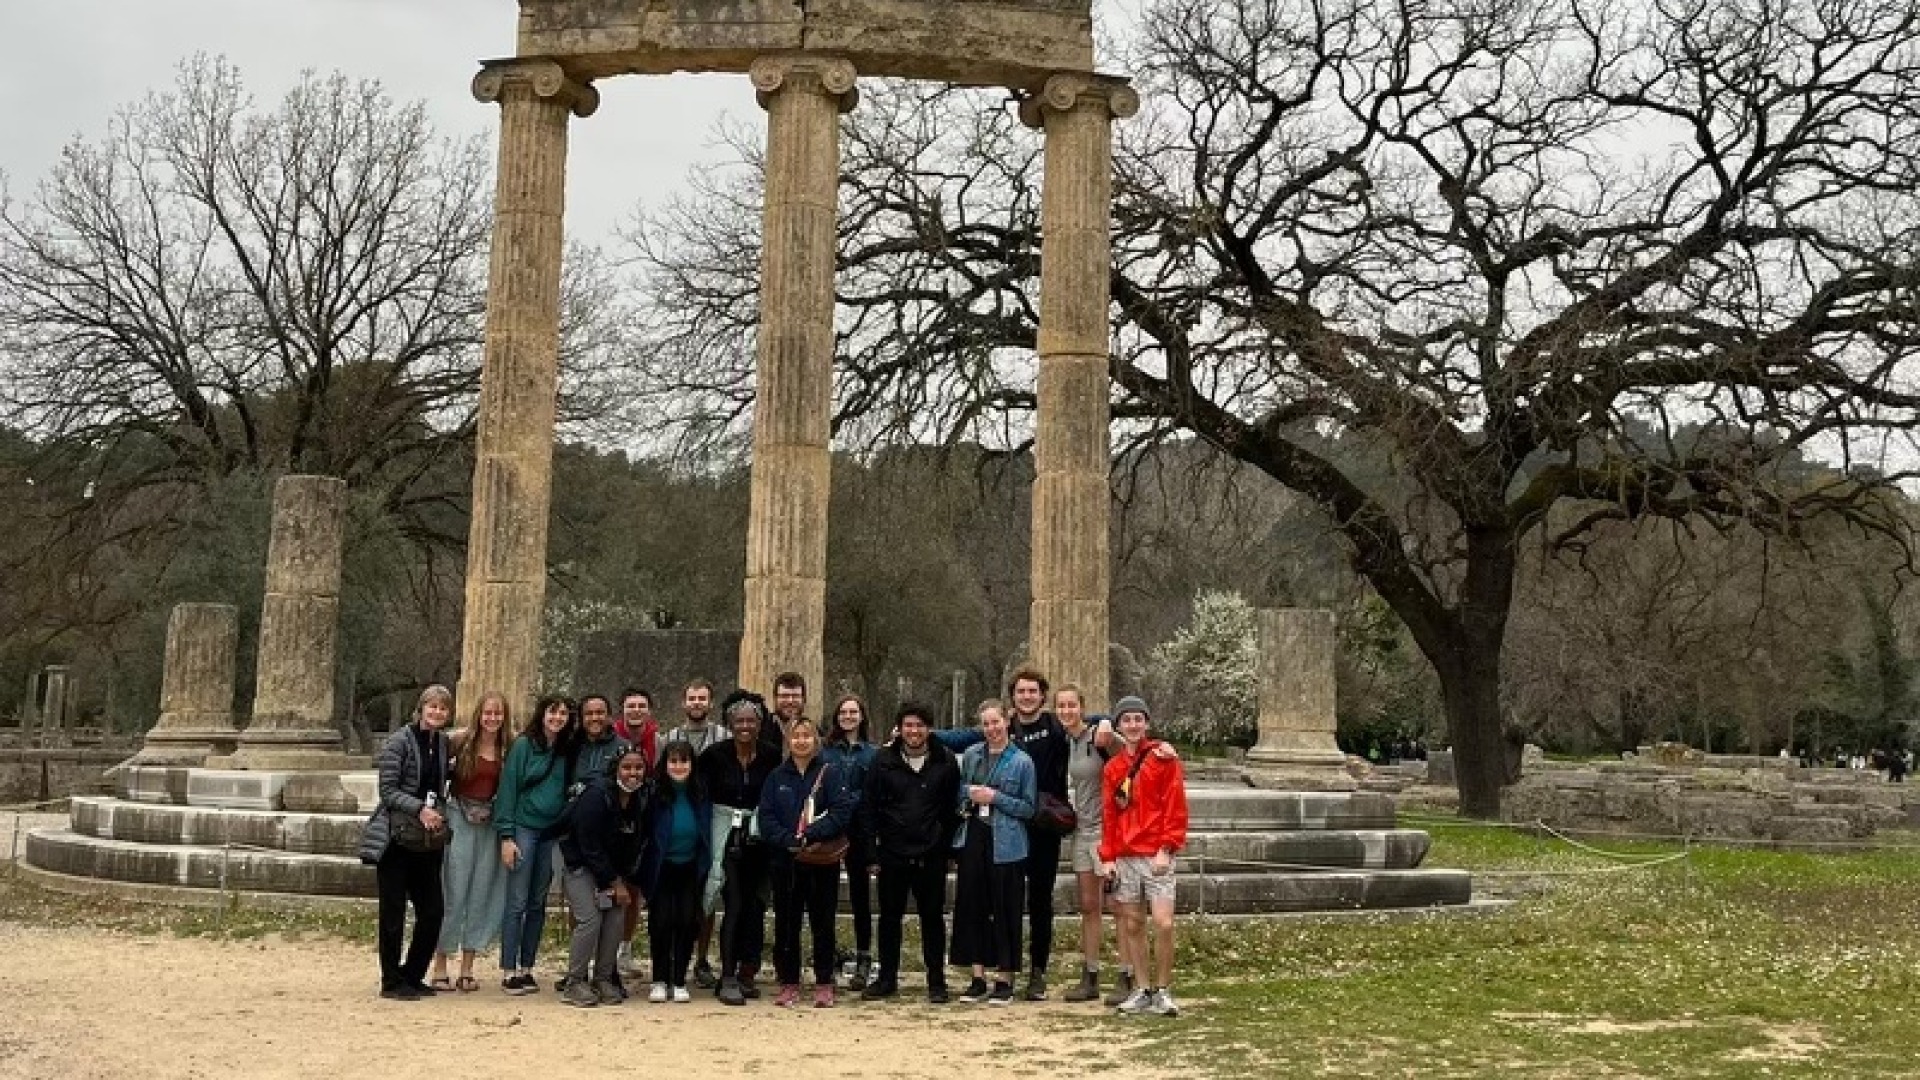 My classmates and I take a picture in front of a ruined olympic parthenon for Ancient Olympia in Greece during spring break